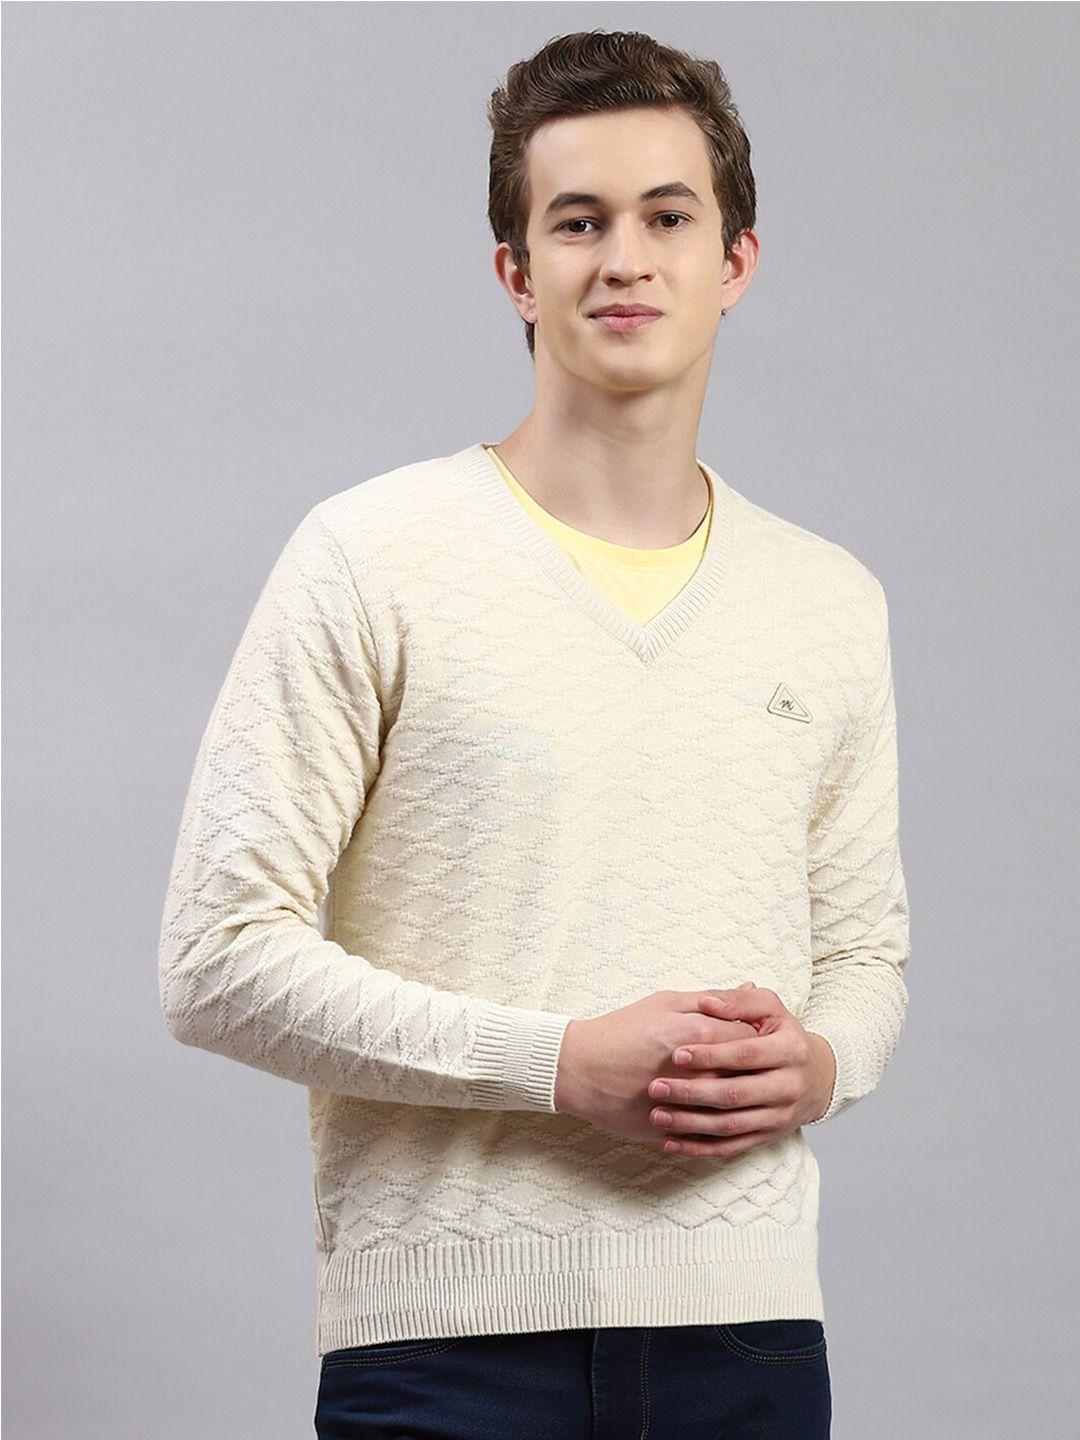 monte carlo cable knit woollen pullover